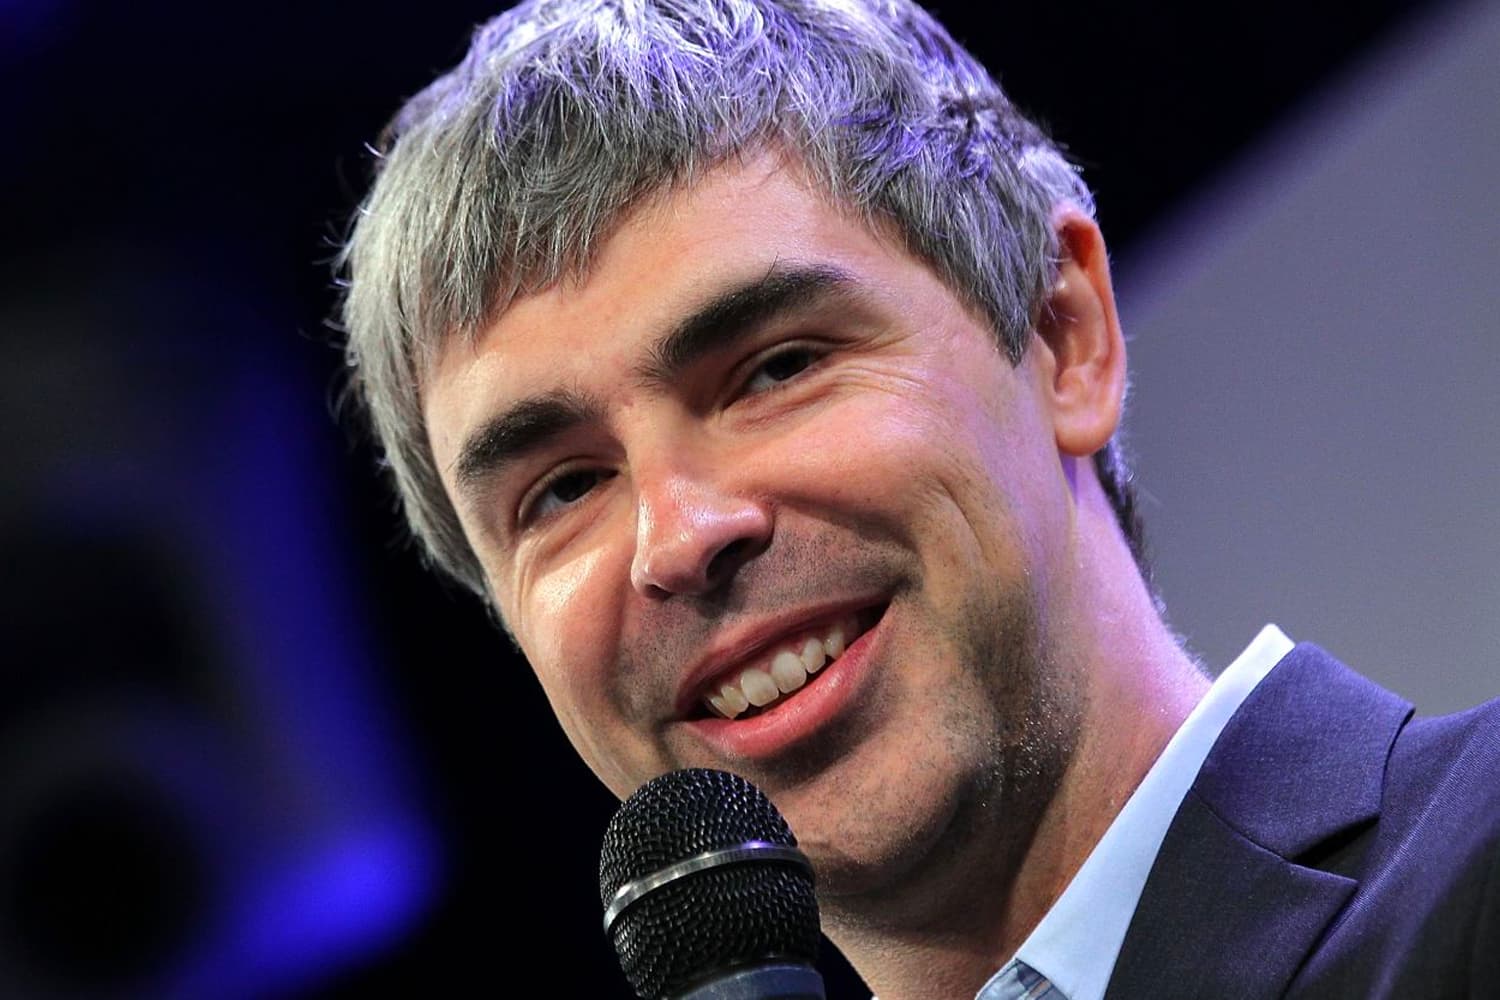 larry page smile face microphone 65bfdbe9ad00028634ae7274